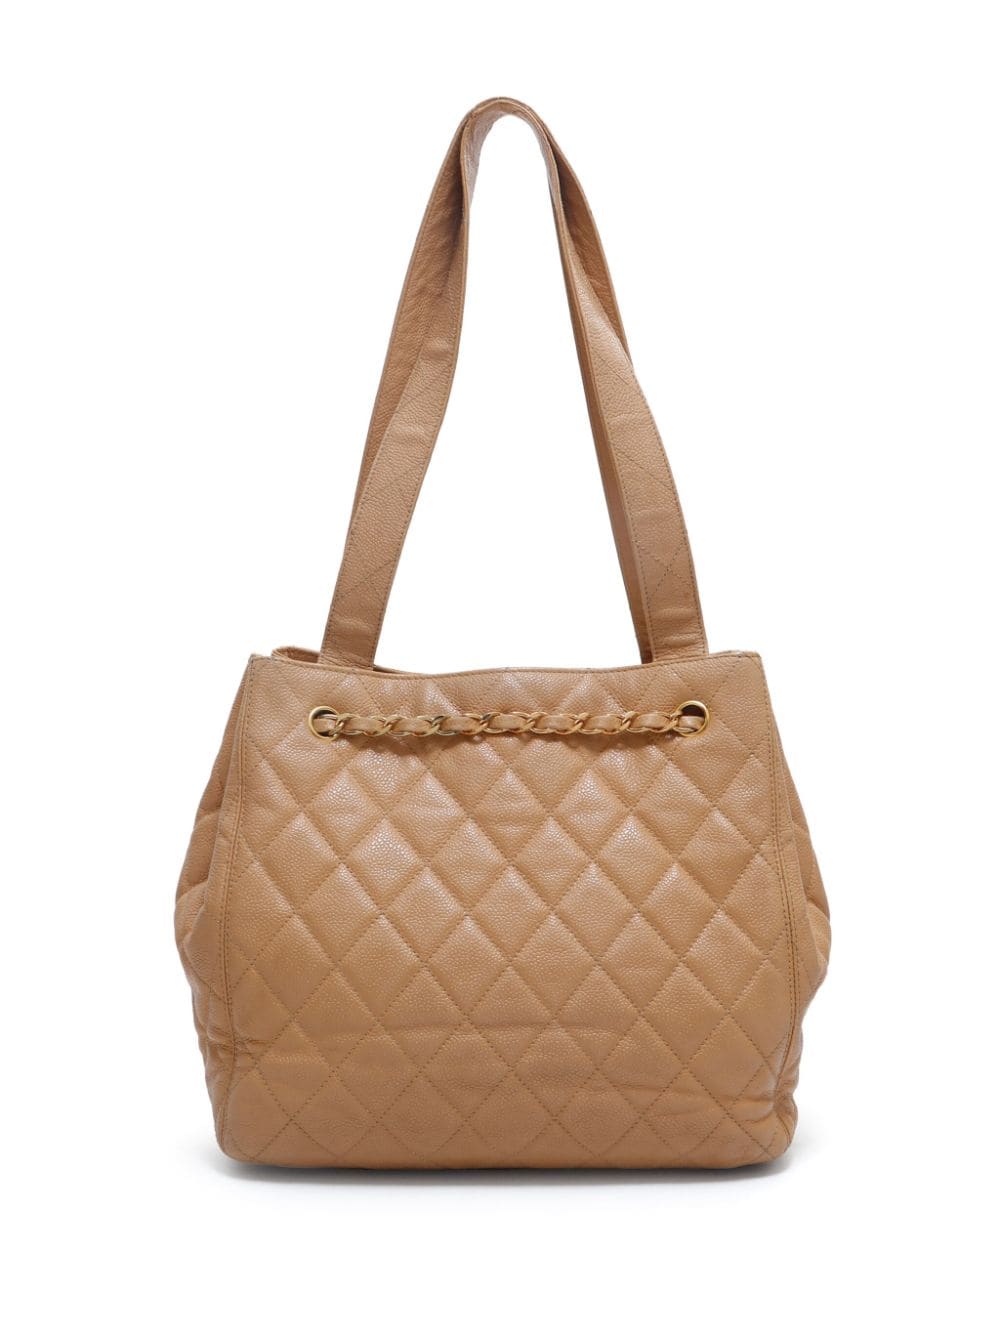 Pre-owned Chanel 1997 Coco Shoulder Bag In Neutrals